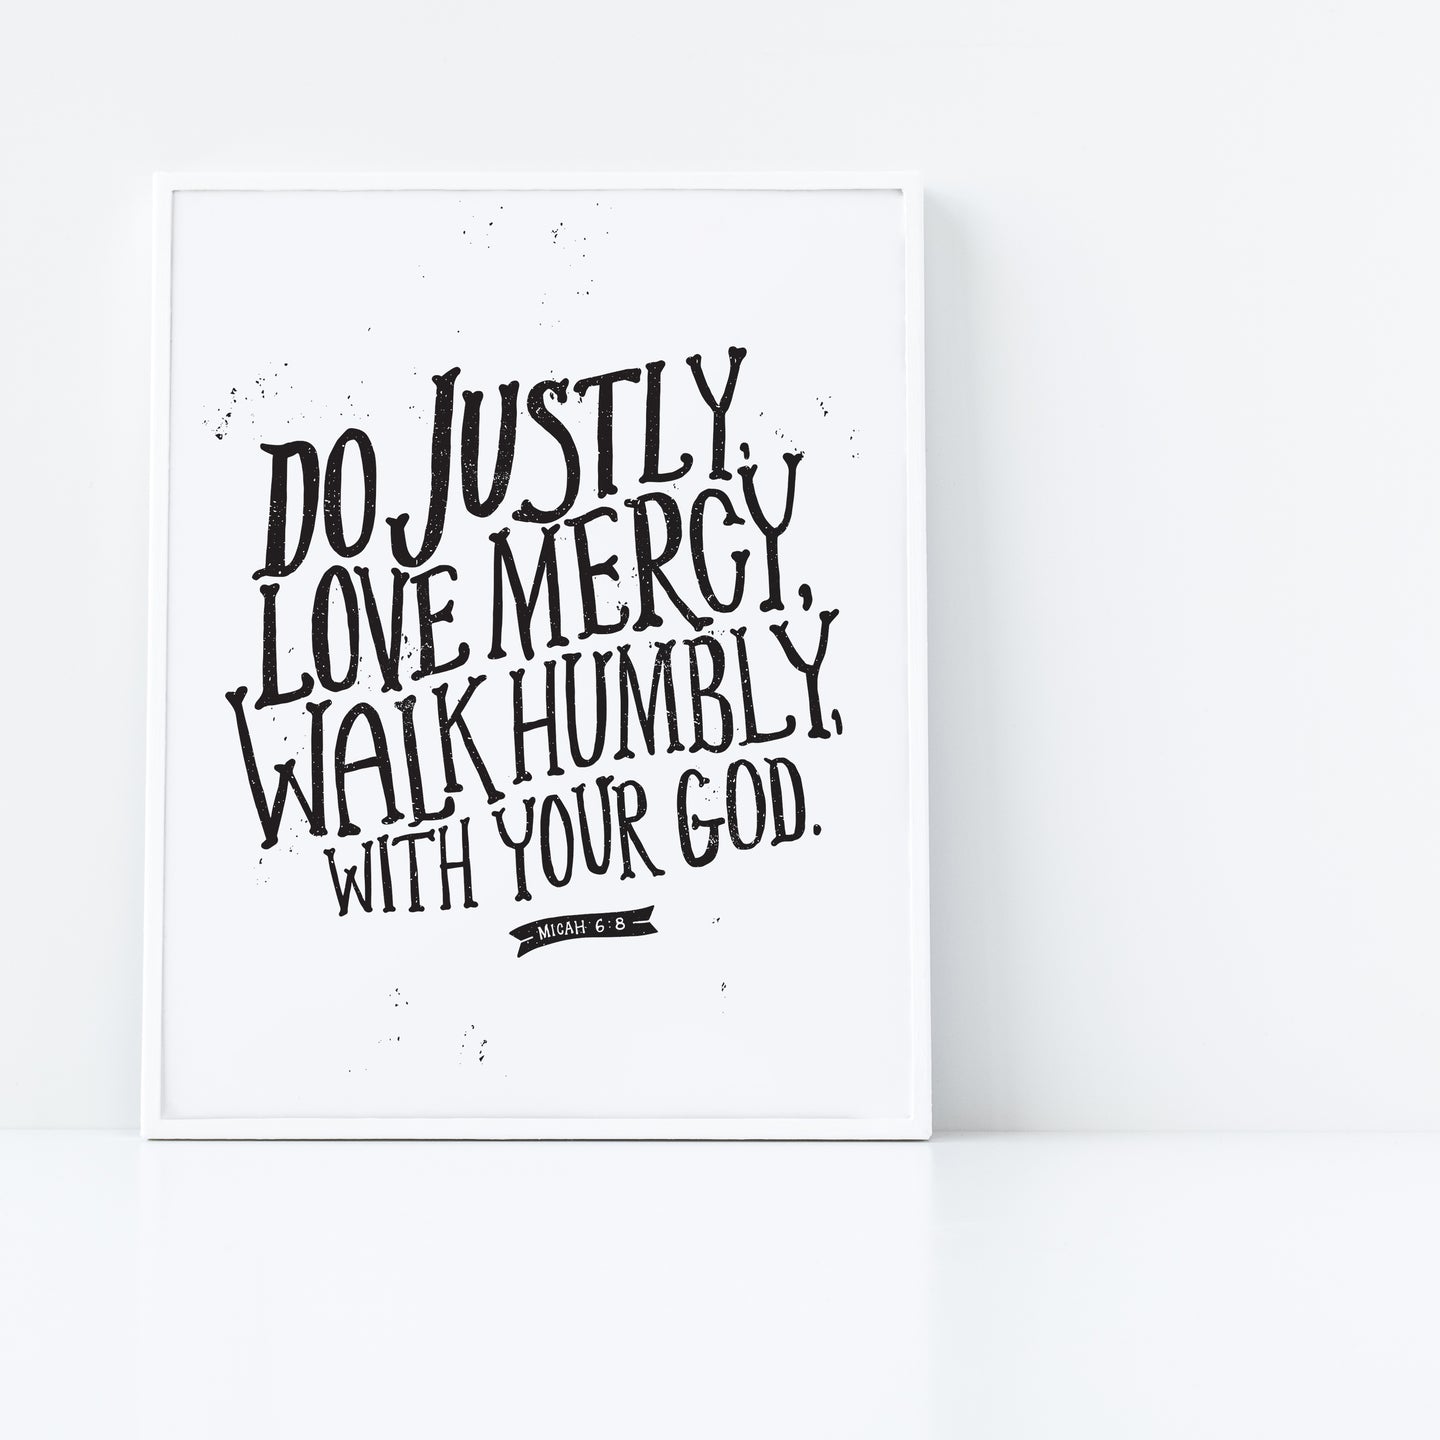 Artwork in a white frame with the artwork printed on white paper and black lettering featuring the Bible verse “Do justly, love mercy, walk humbly, with your God, Micah 6:8.”